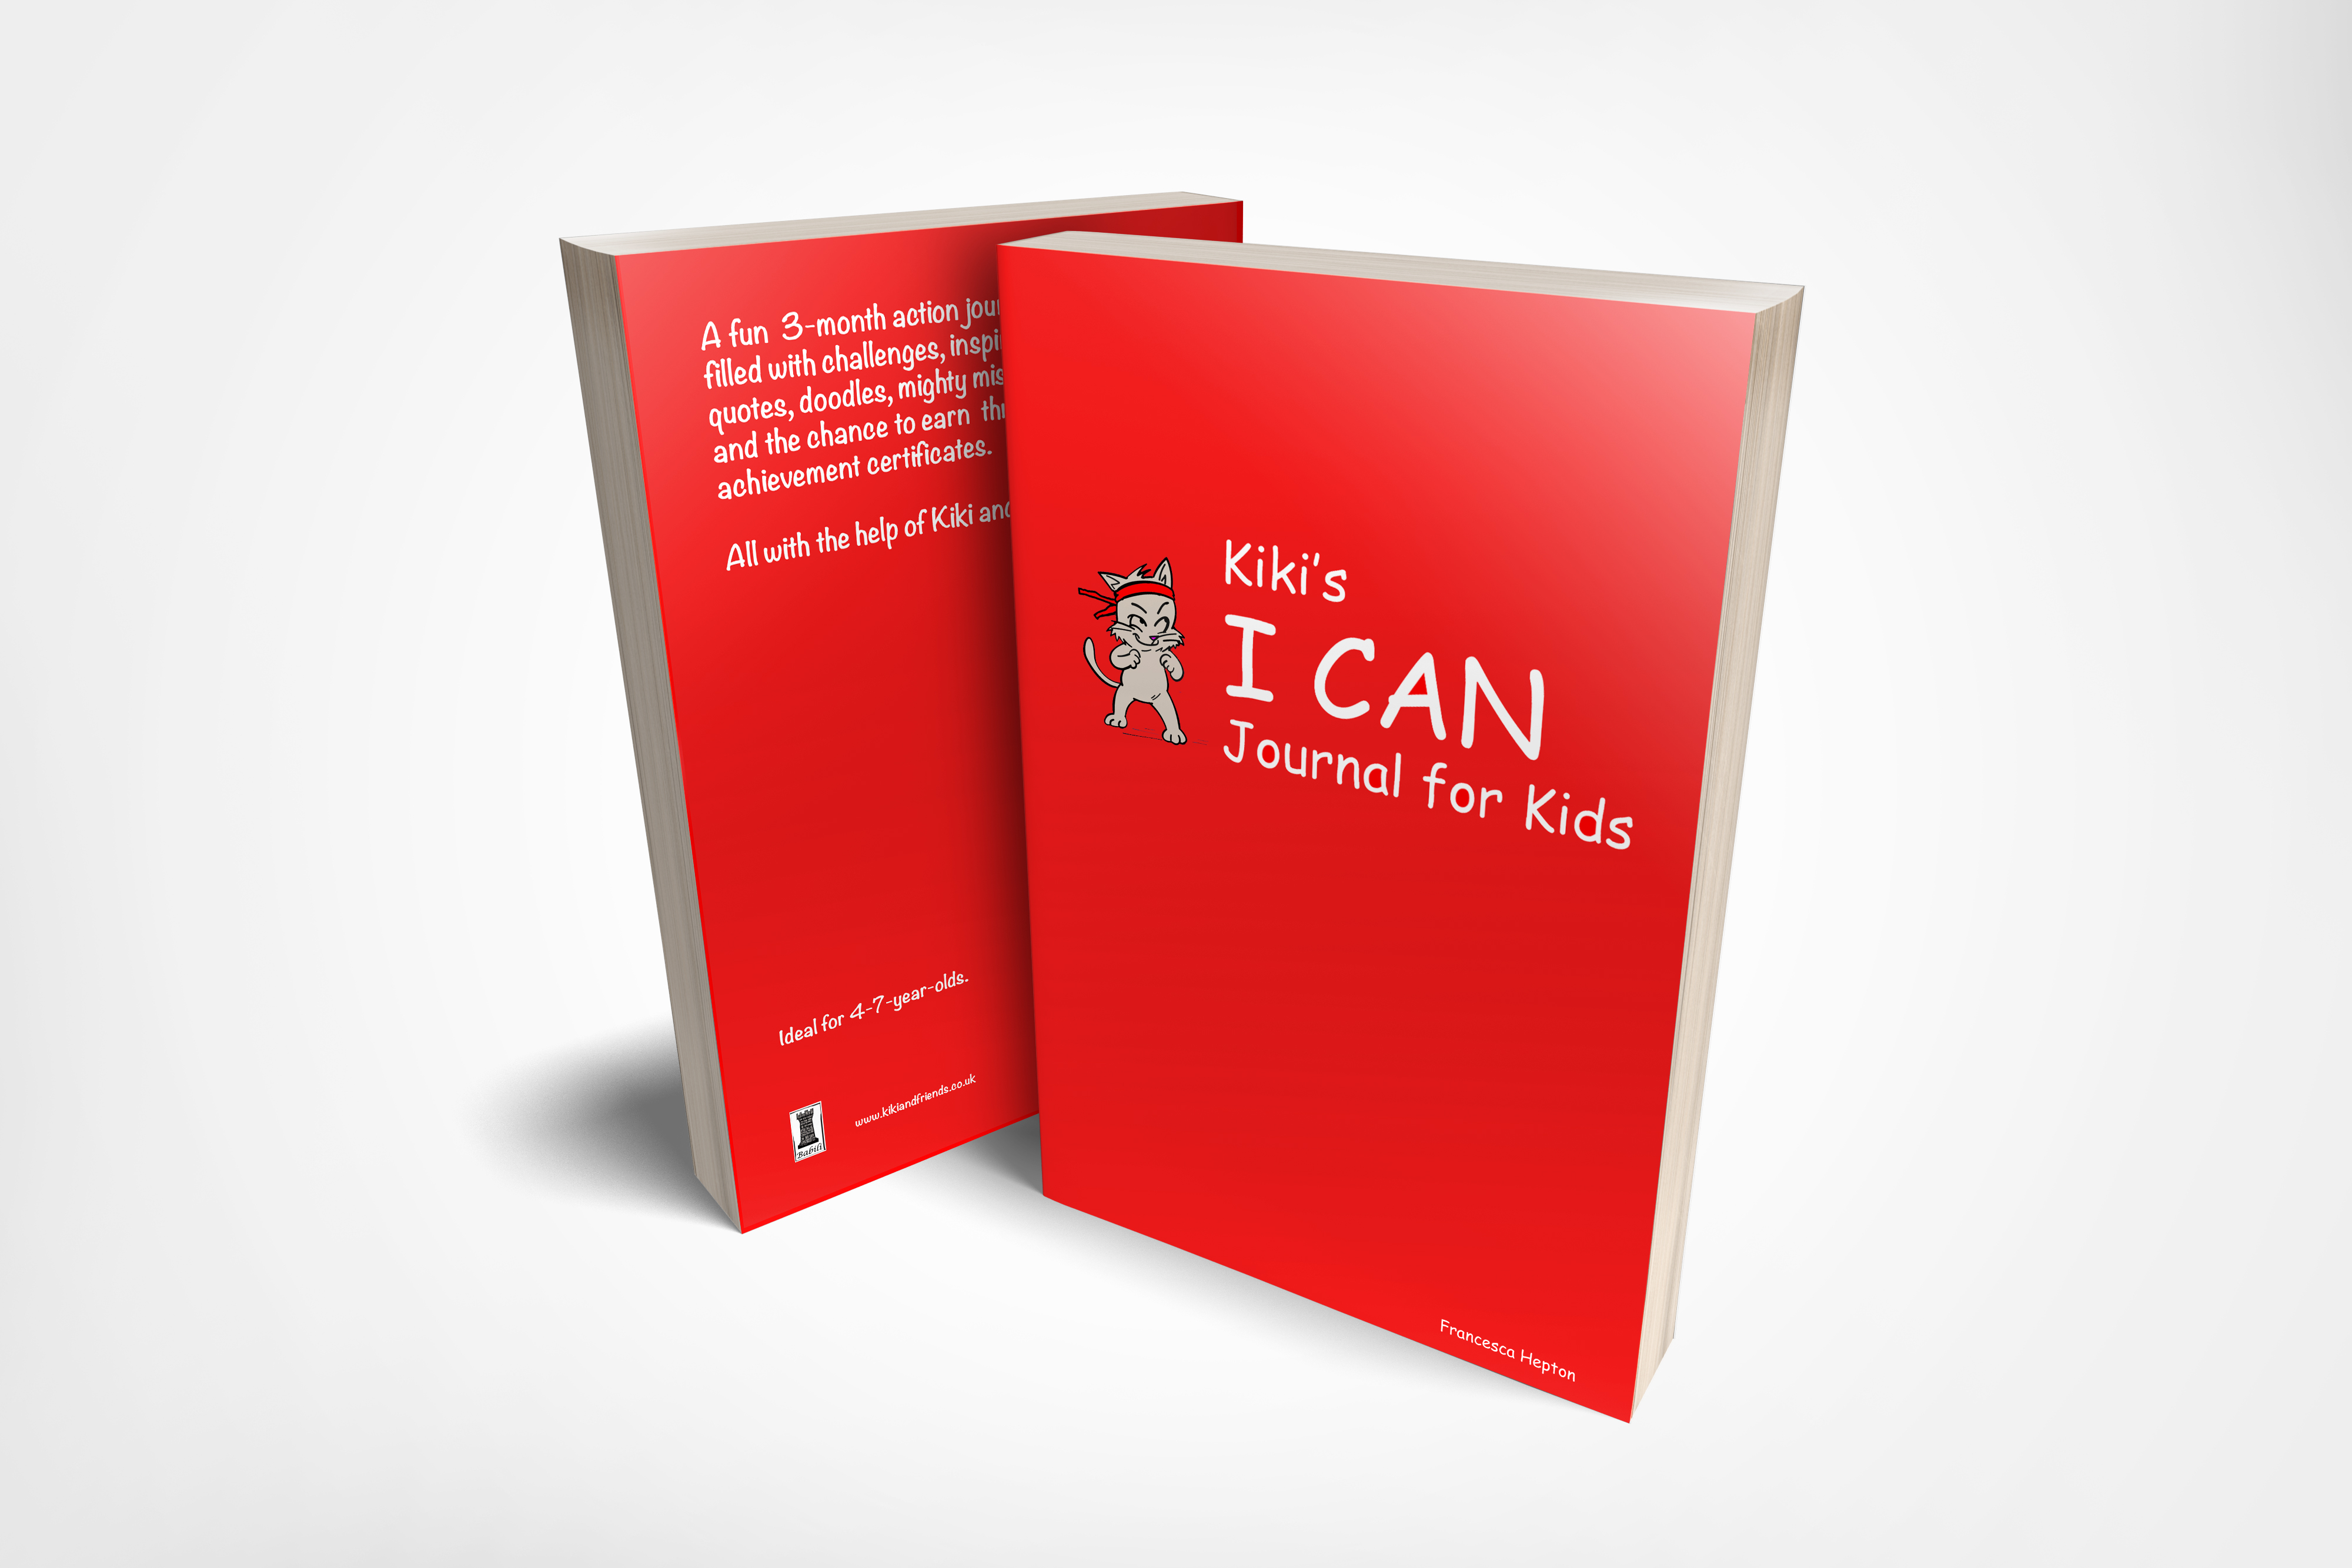 3-Month Daily Journal For Children: Kiki's I CAN Journal for Kids encourages children to look for the positive, spend time being mindful and reflect on how they feel. Its scientifically proven methods promote a confident mindset and nurture healthy choices.